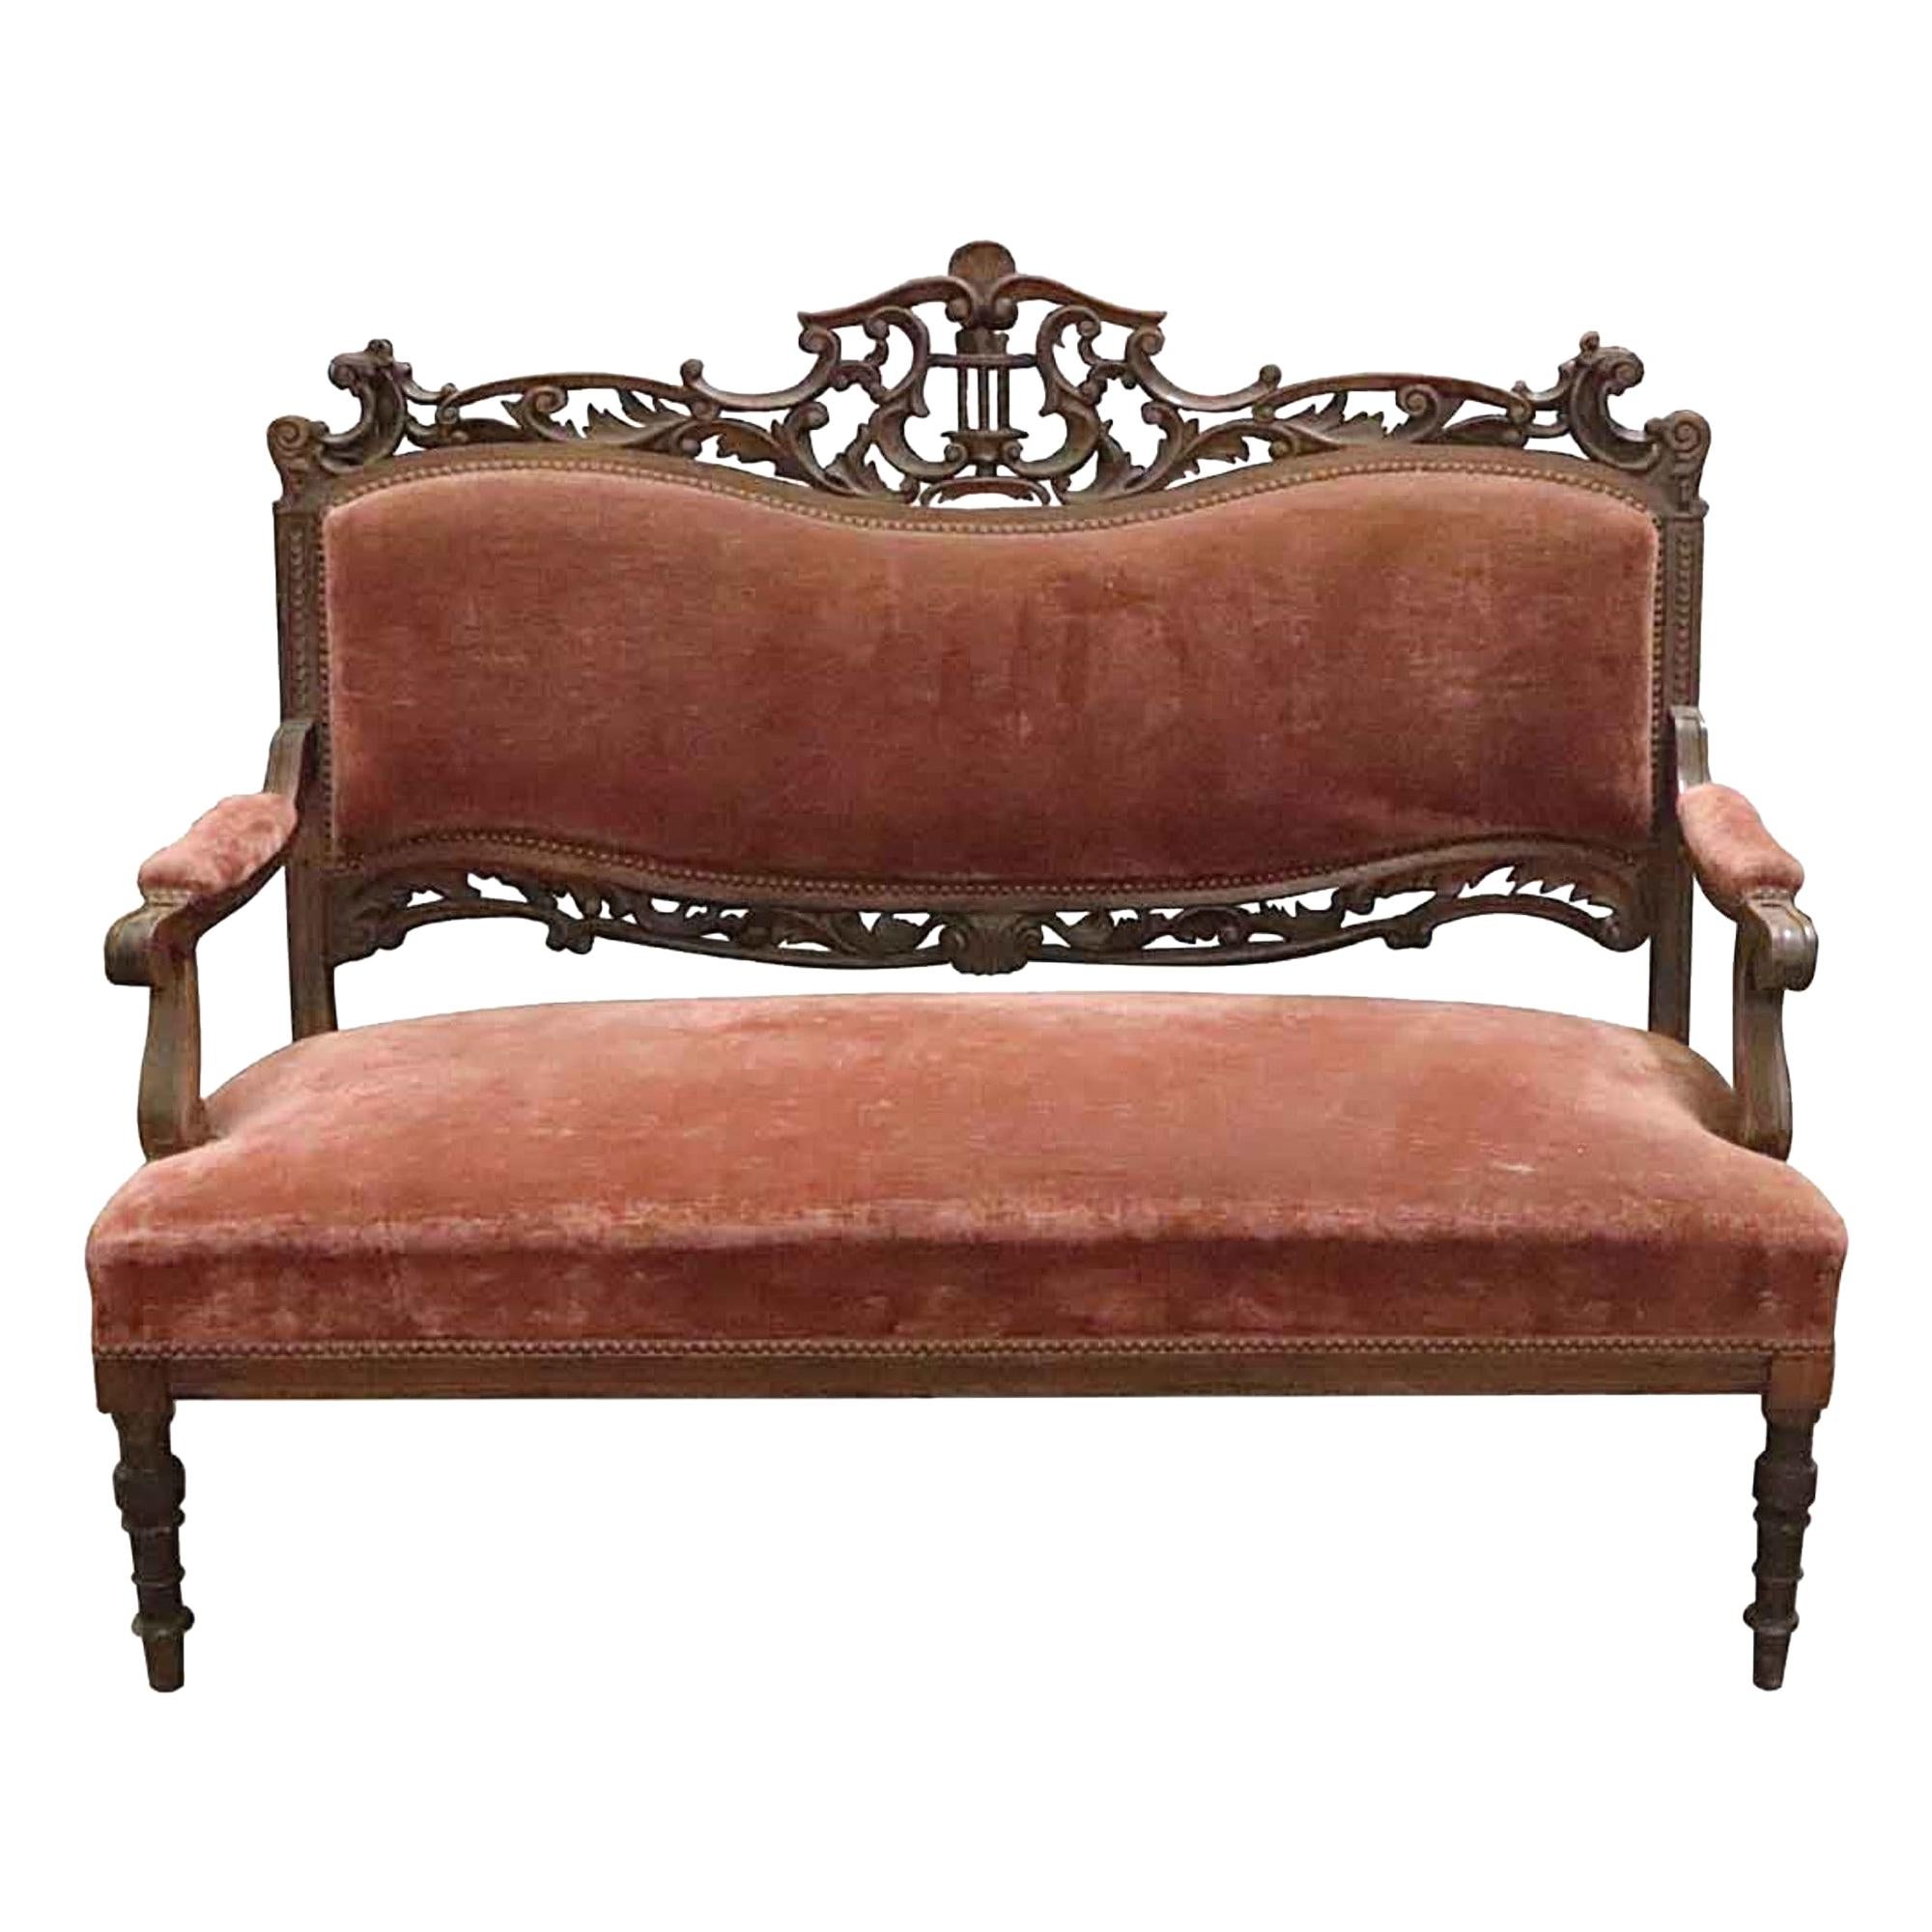 1890s French Red Velvet Victorian Hand Carved Wood Loveseat with Musical Motif